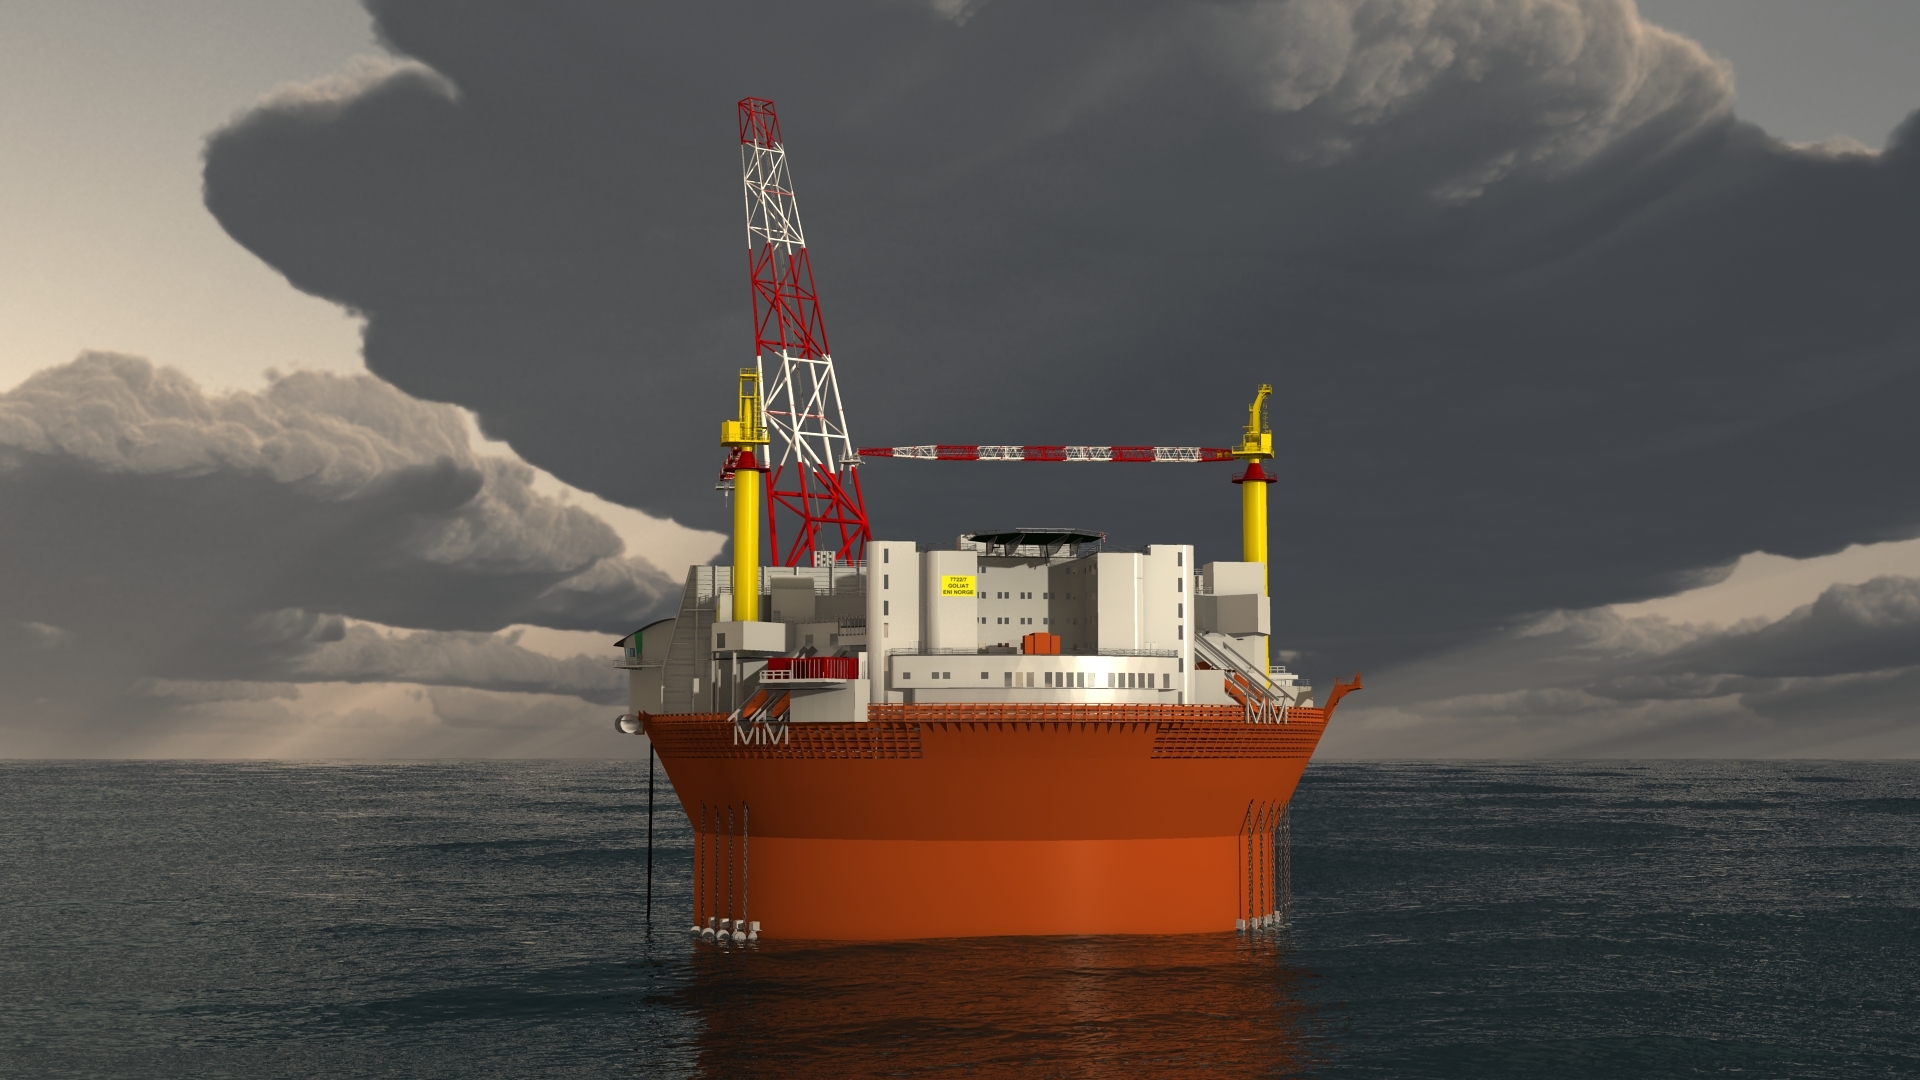 The Goliat FPSO. Pic courtesy of Eni Norge AS.